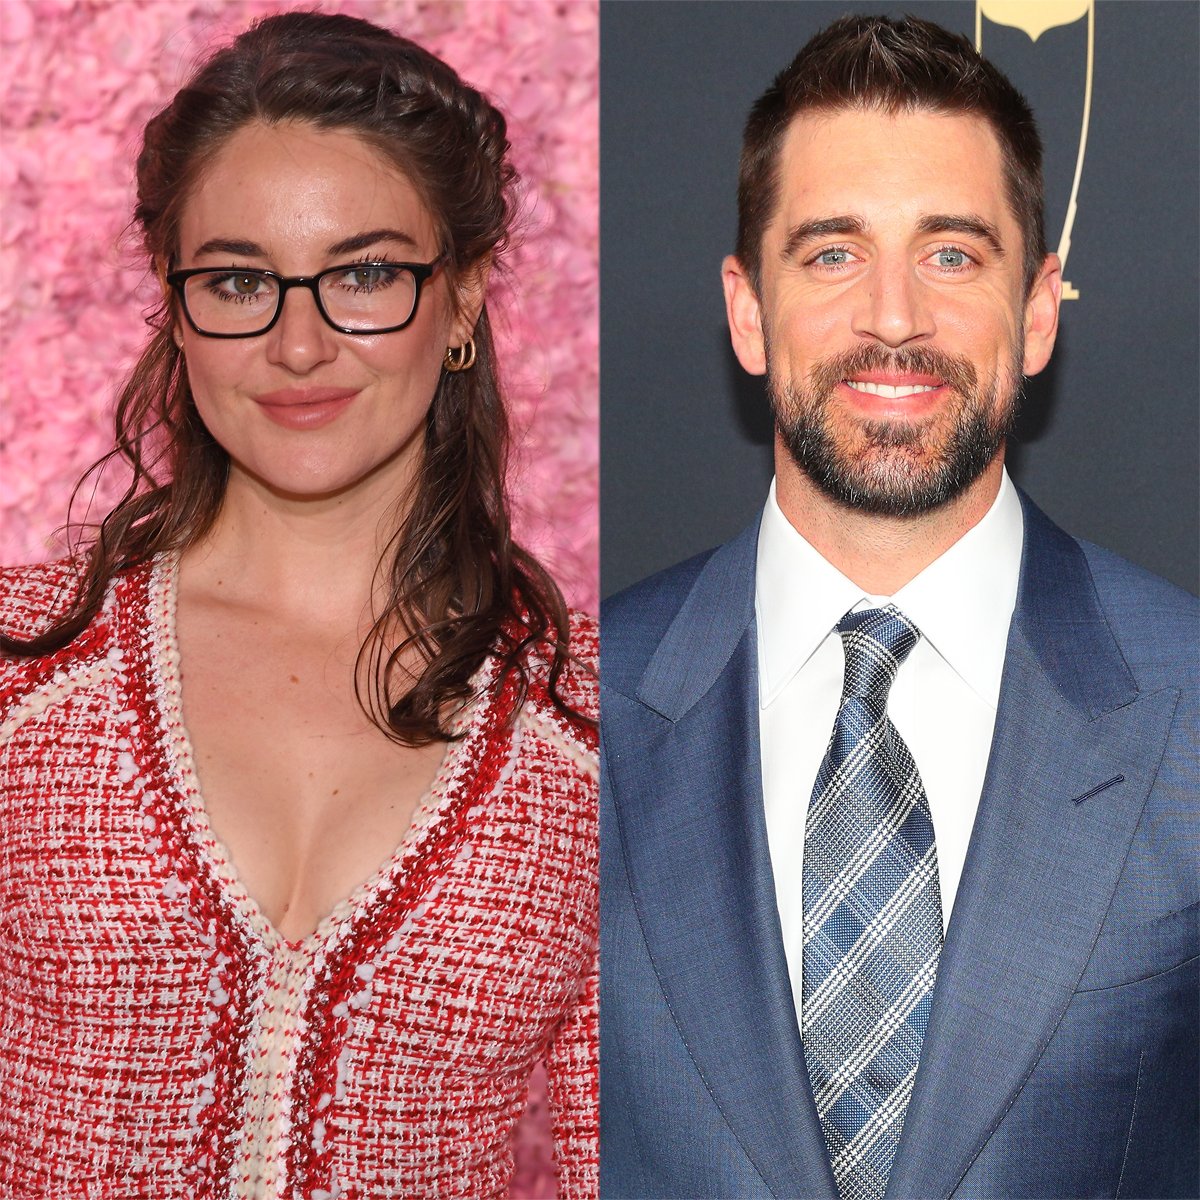 Shailene Woodley confirms engagement to Aaron Rodgers